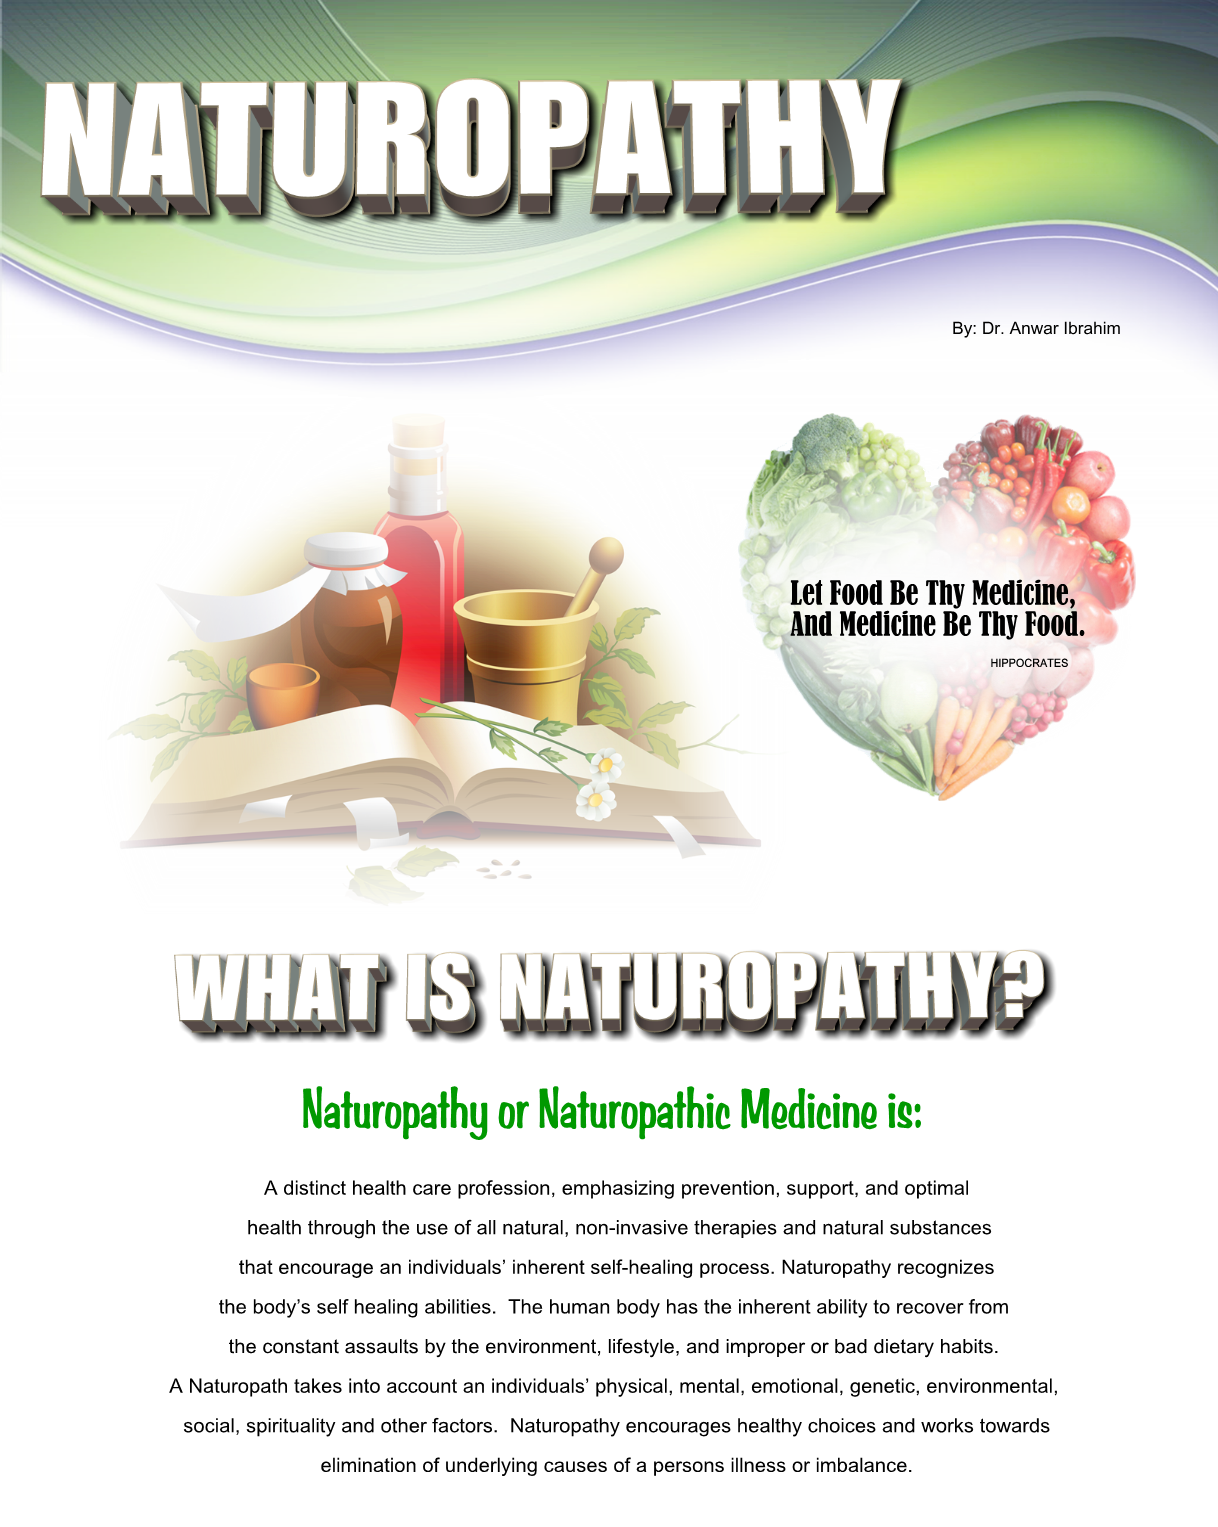 What Is naturopathy: A distinct health care profession, emphasizing prevention, support, and optimal   health through the use of all natural, non-invasive therapies and natural substances   that encourage an individuals’ inherent self-healing process. Naturopathy recognizes   the body’s self healing abilities.  The human body has the inherent ability to recover from   the constant assaults by the environment, lifestyle, and improper or bad dietary habits.   A Naturopath takes into account an individuals’ physical, mental, emotional, genetic, environmental,   social, spirituality and other factors.  Naturopathy encourages healthy choices and works towards  elimination of underlying causes of a persons illness or imbalance.